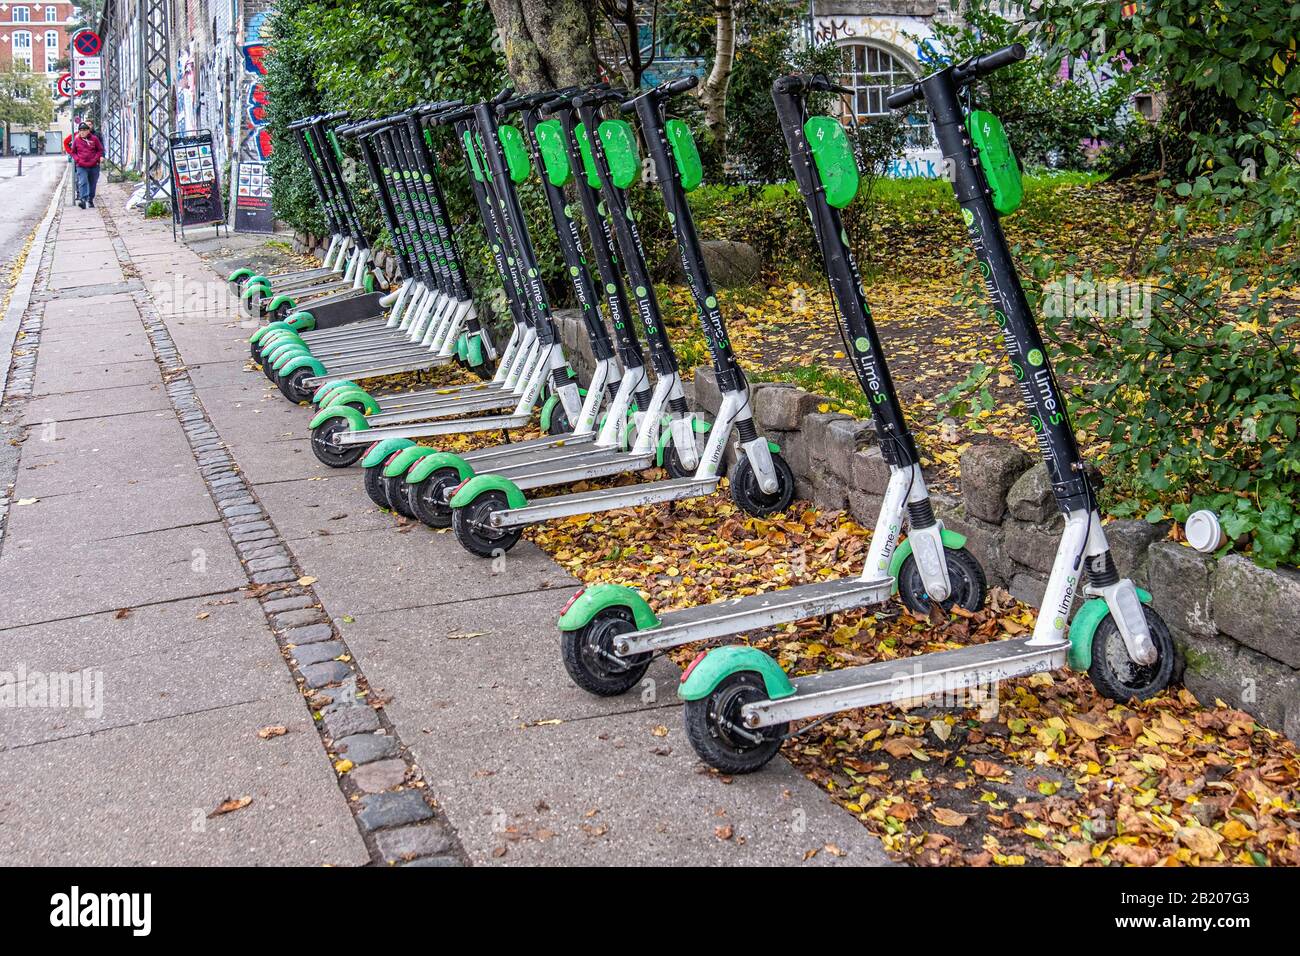 Row of Lime Rental E-scooters parked in Prensessegade street, Copenhagen Stock Photo - Alamy